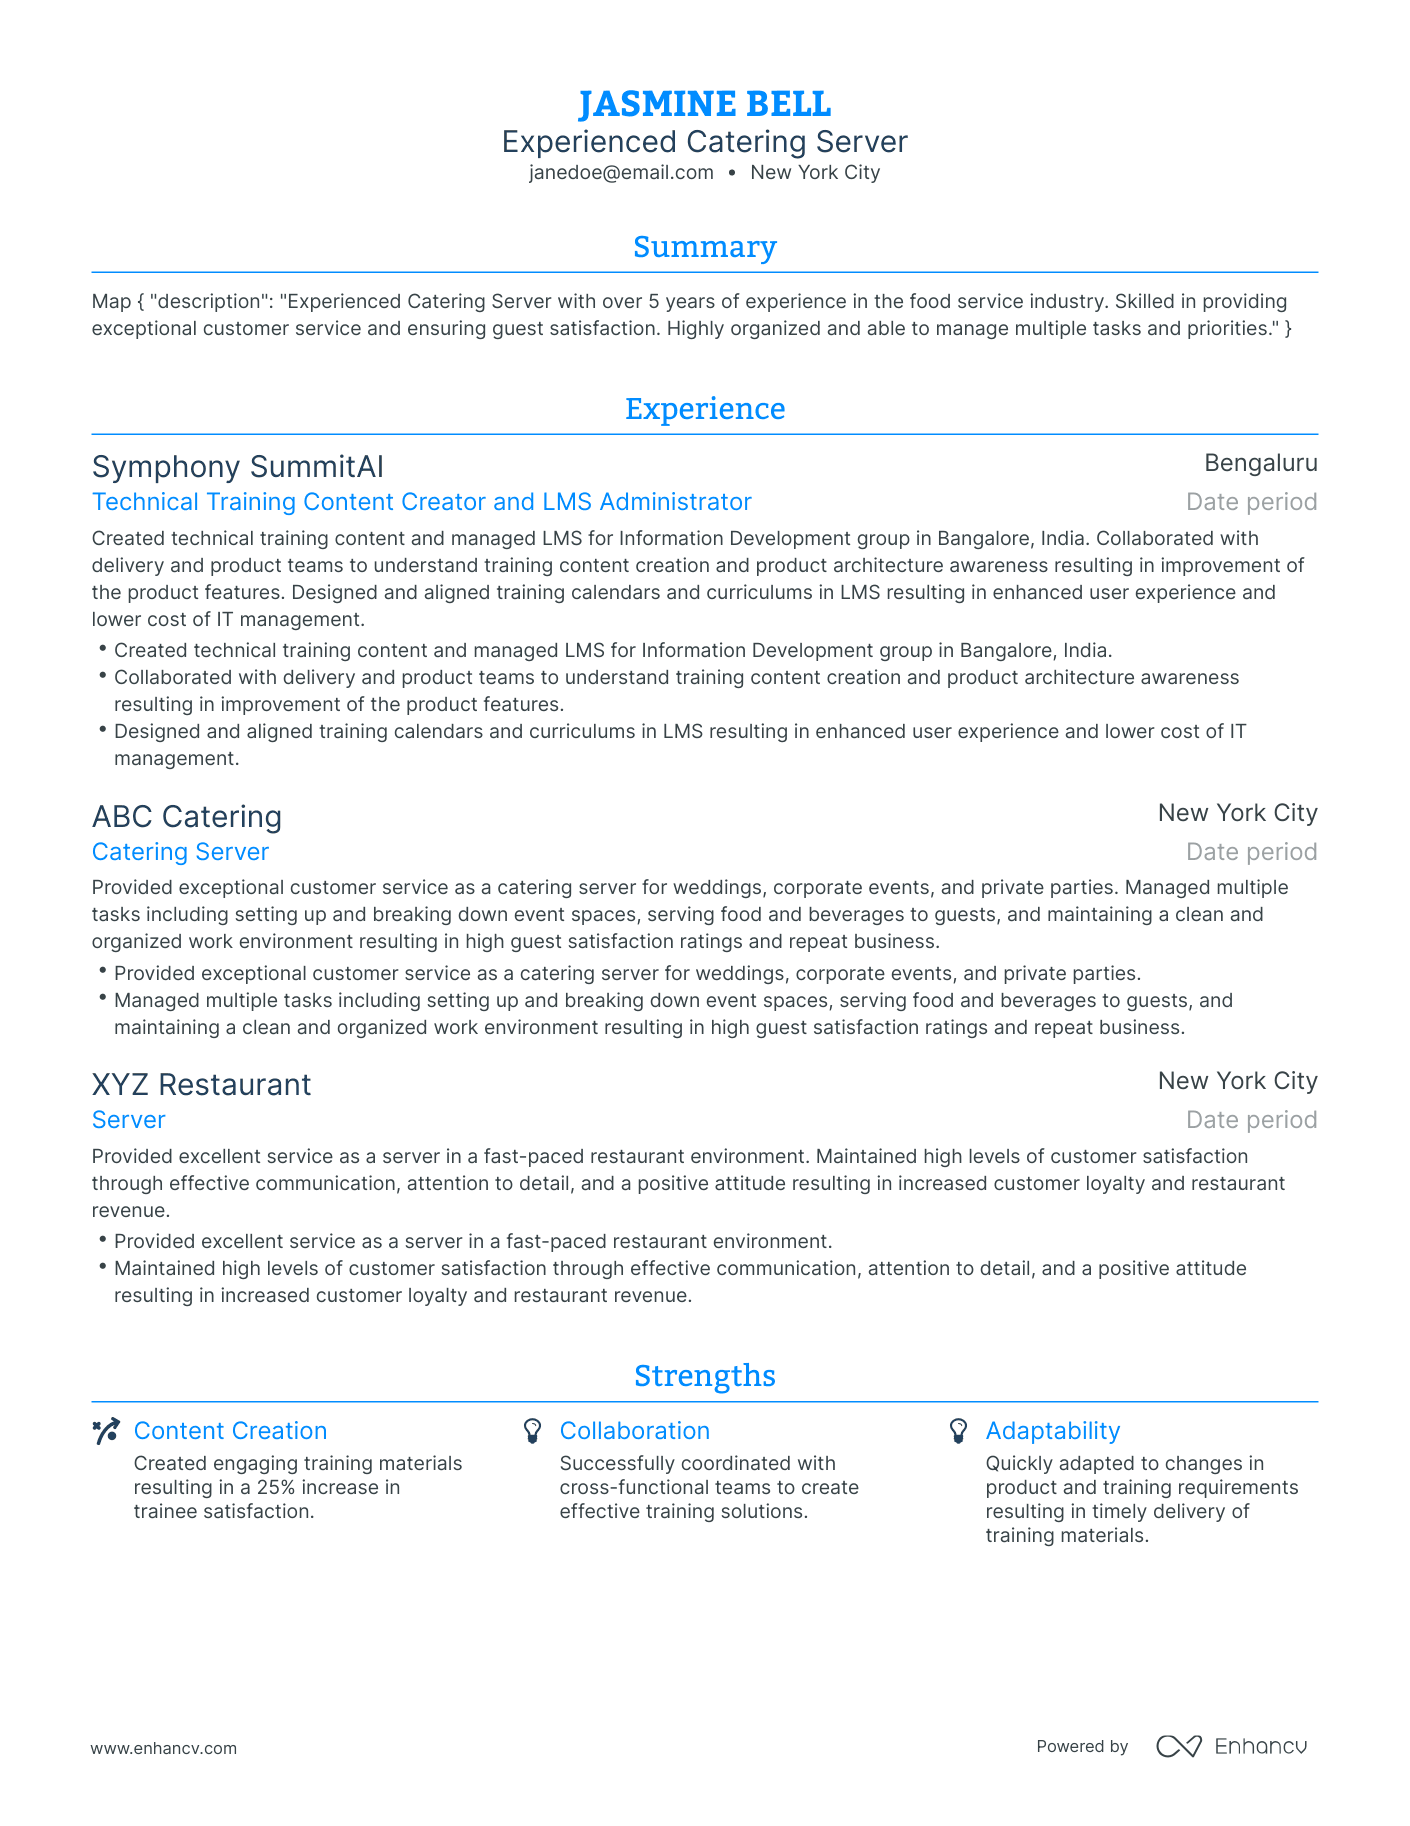 Traditional Catering Server Resume Template